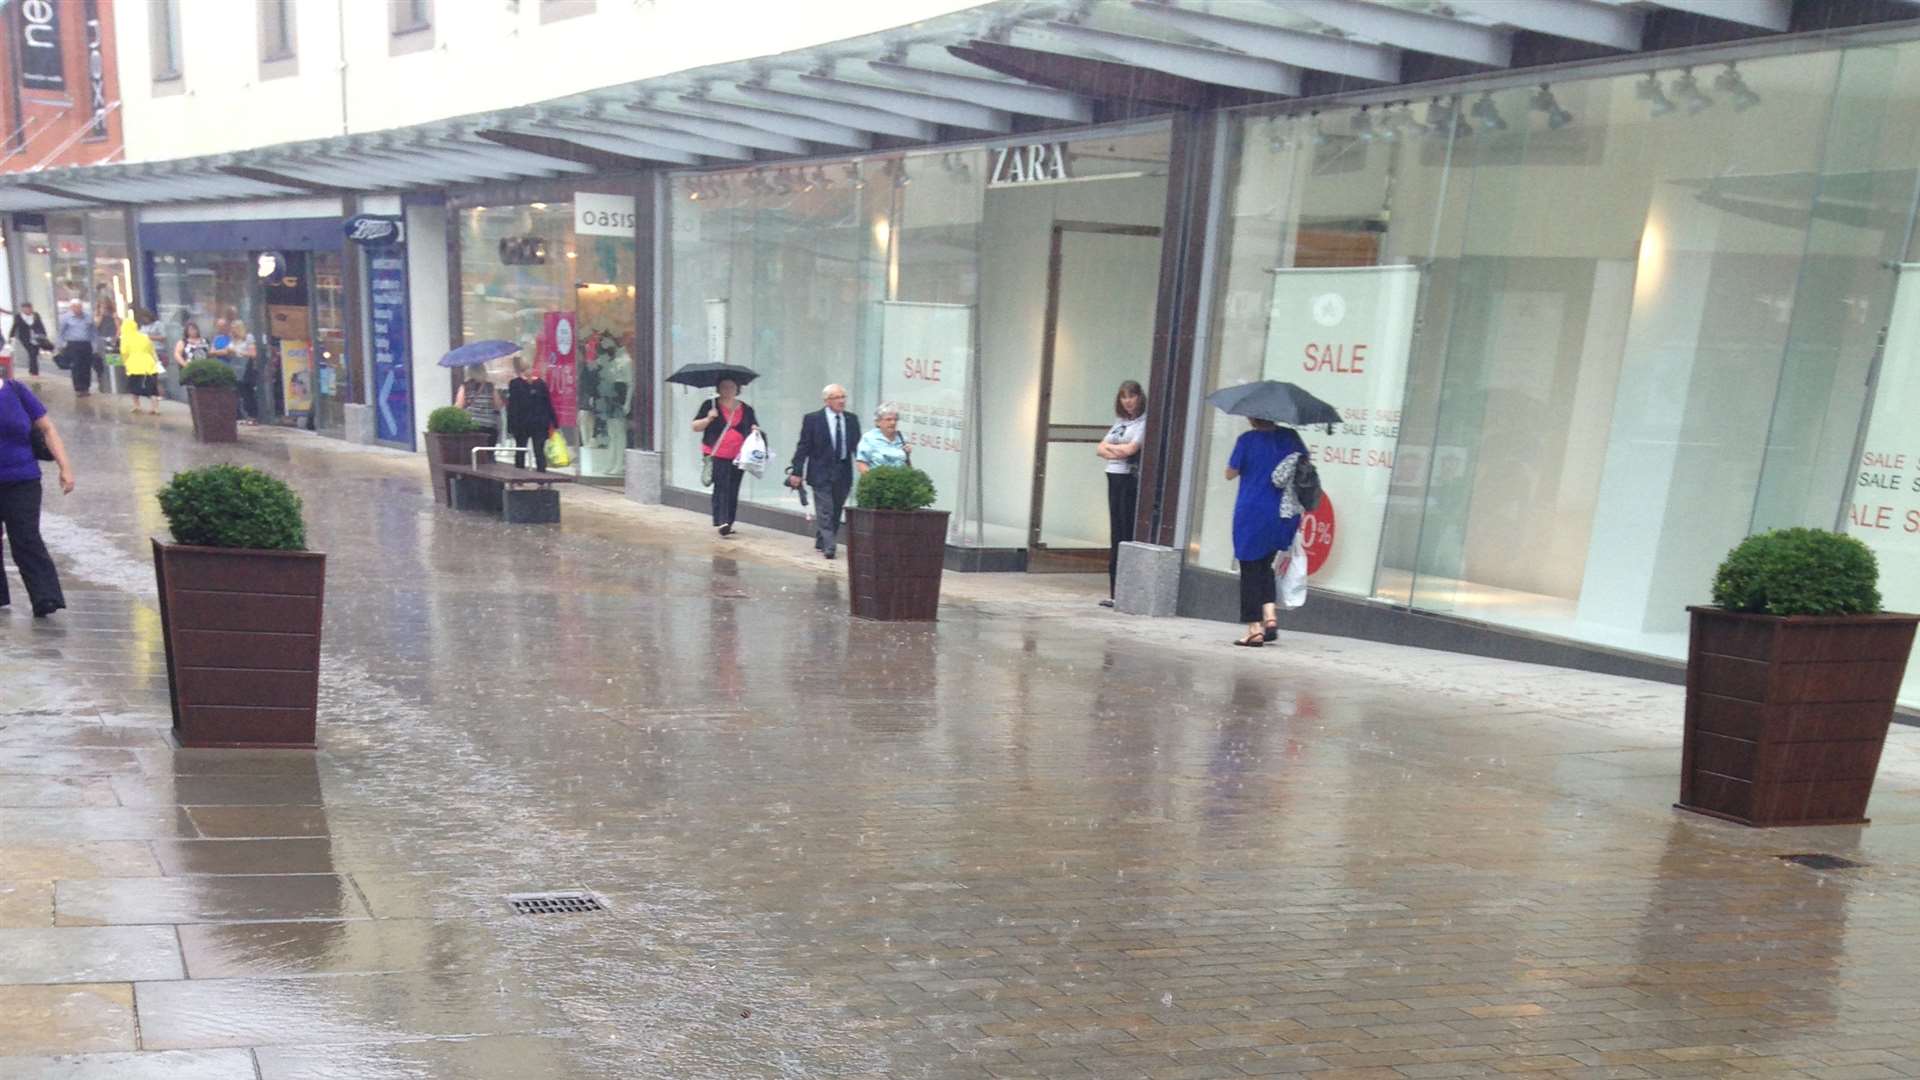 Shoppers in Maidstone have been caught up in the showers. Picture: Kent Highways